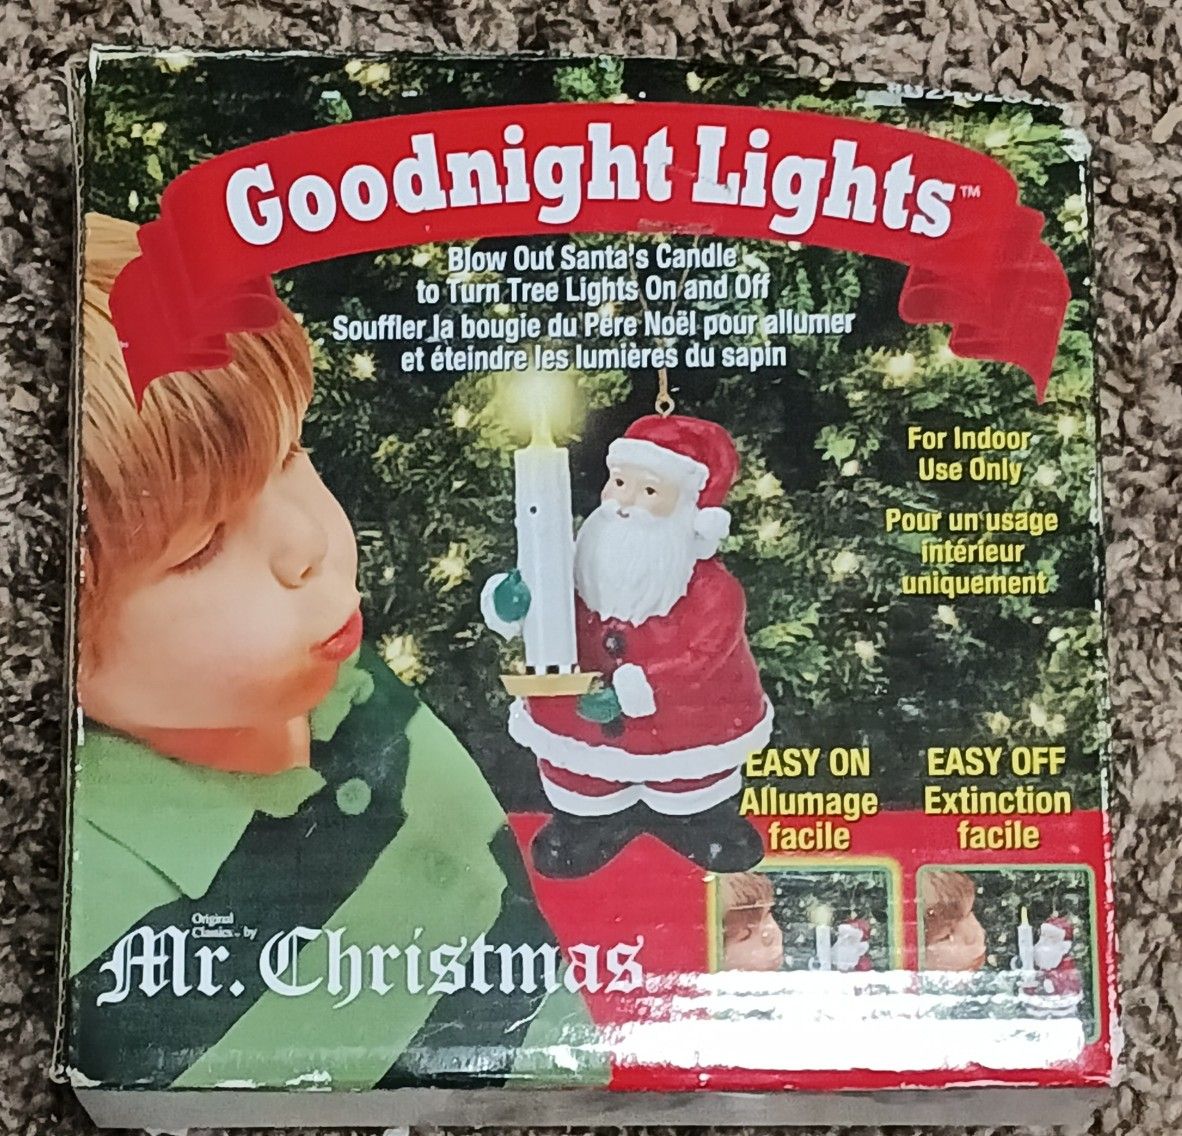 Mr Christmas Goodnight Lights Blow Out Santa's Candle Turn On & Off Tree Lights